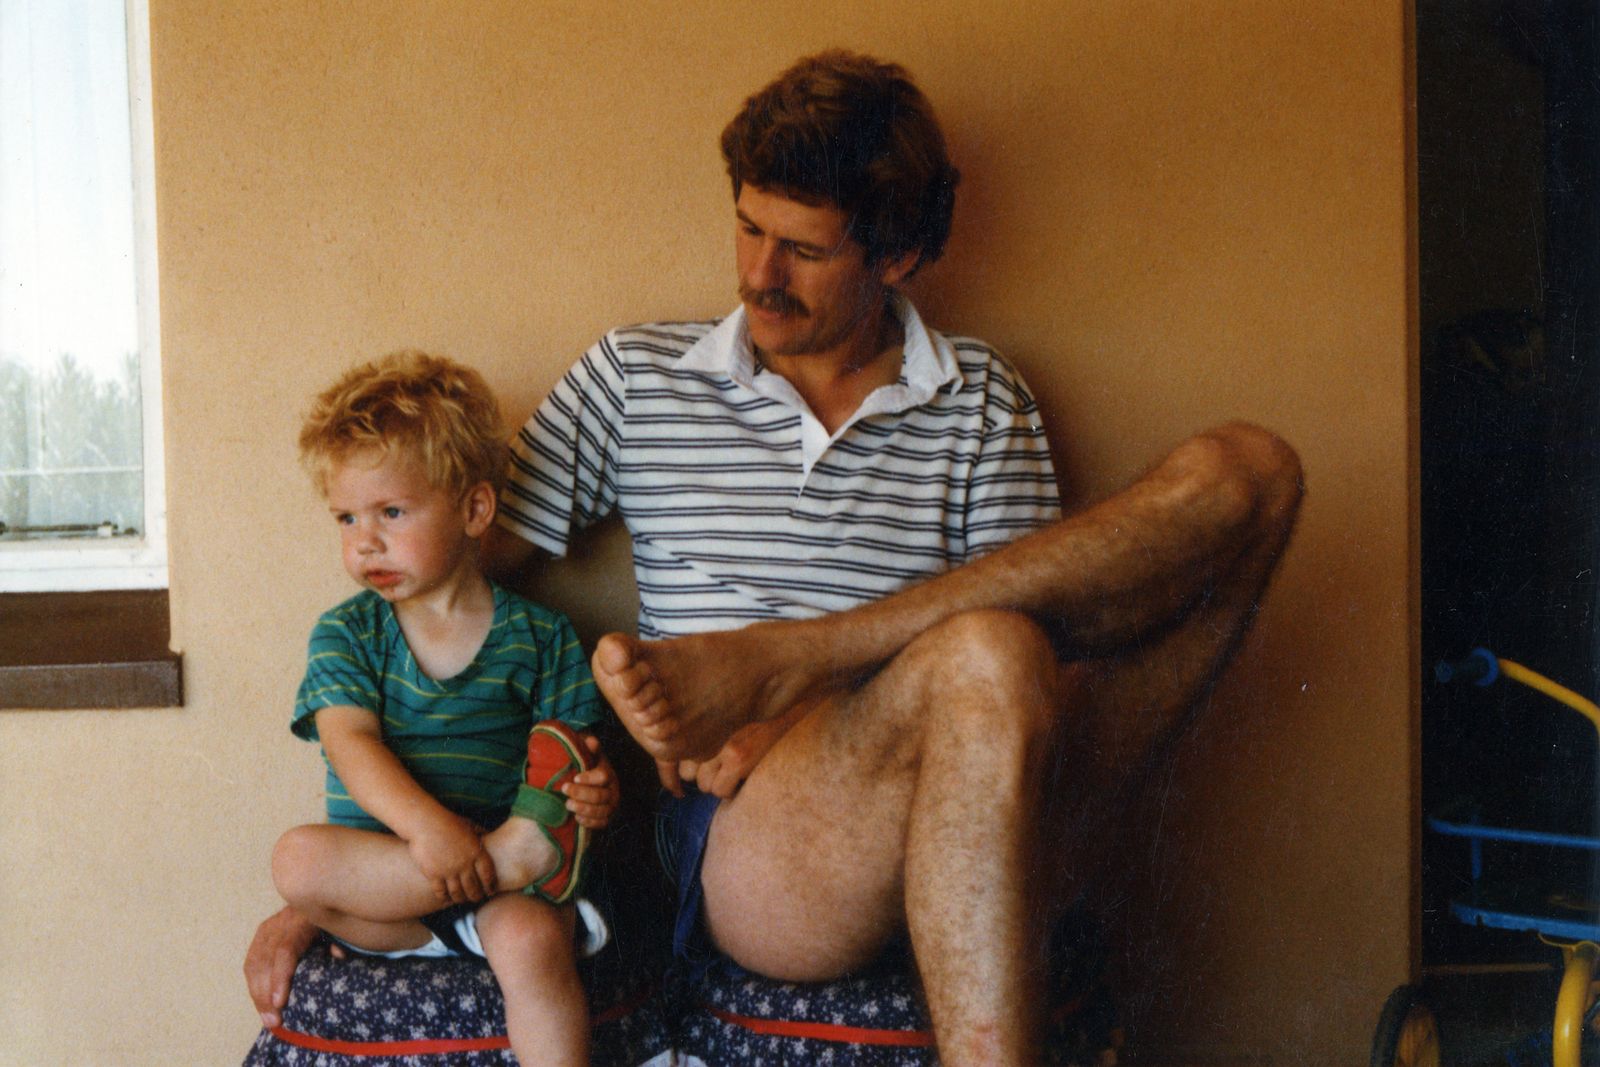 © Jansen van Staden - Pa and I, by Ma, 1989